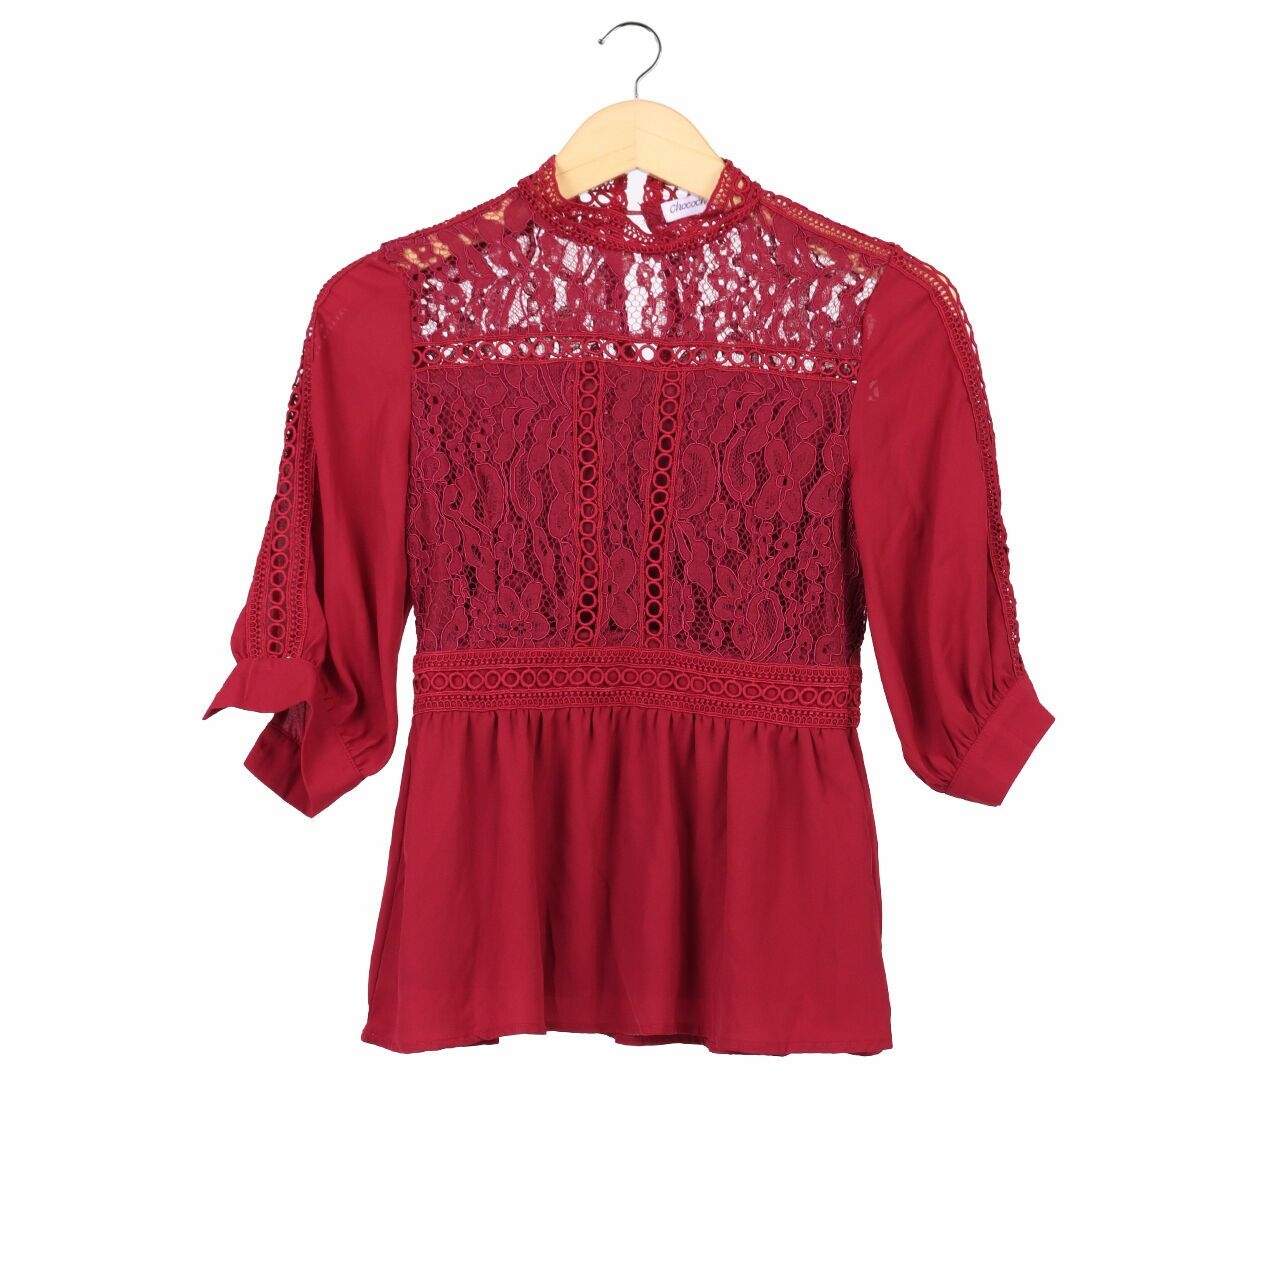 Chocochips Red Blouse